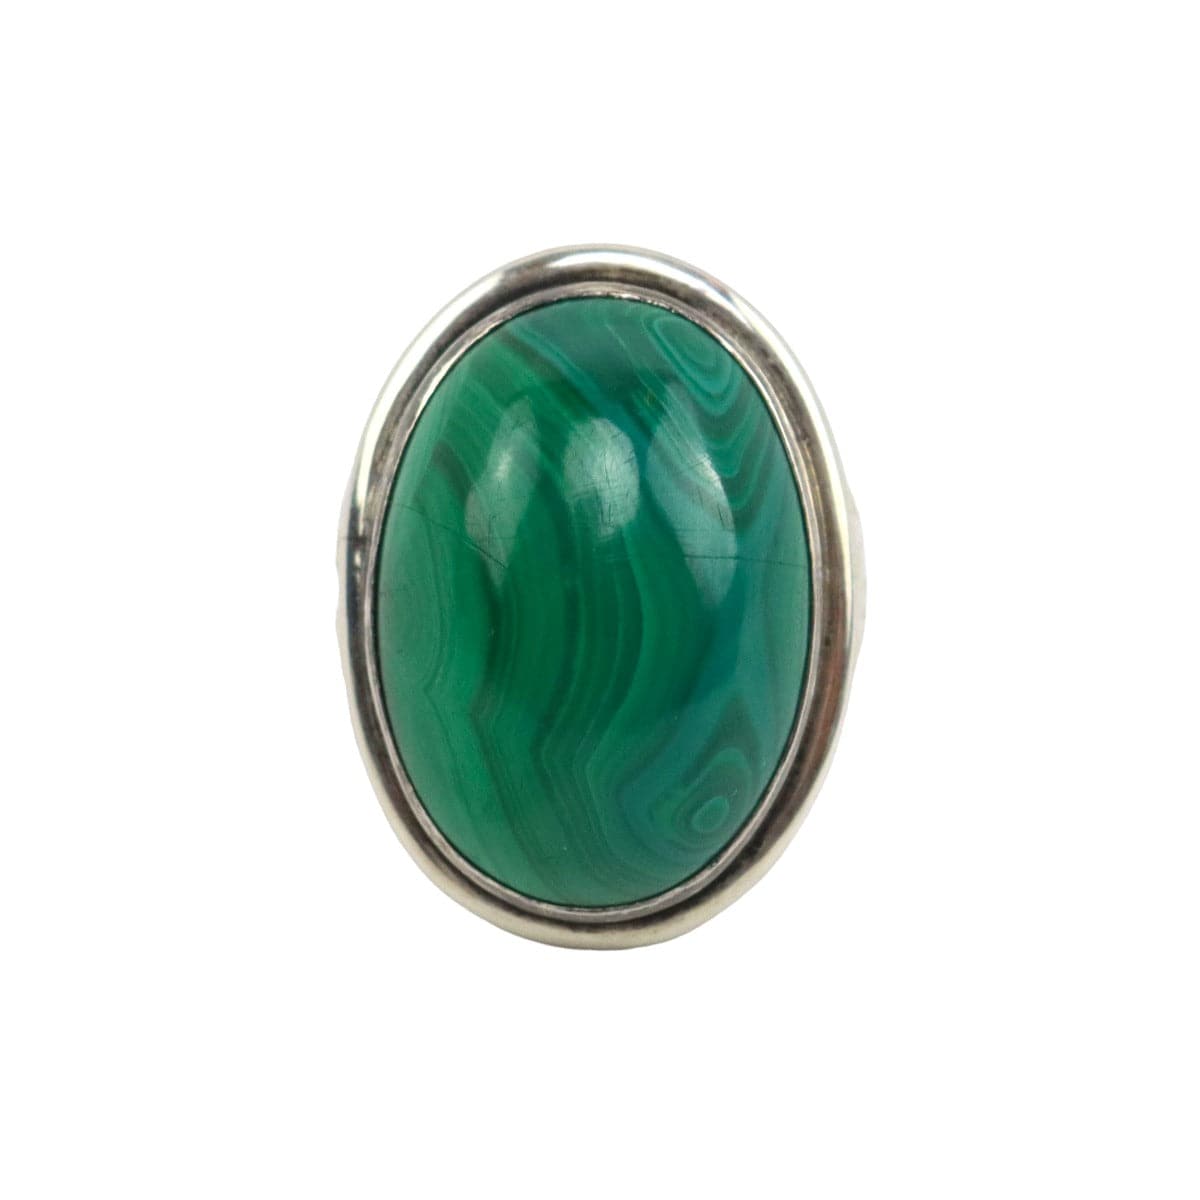 Frank Patania Jr. - Malachite and Sterling Silver Ring c. 2000, size 9.75 (J91699-1022-035)